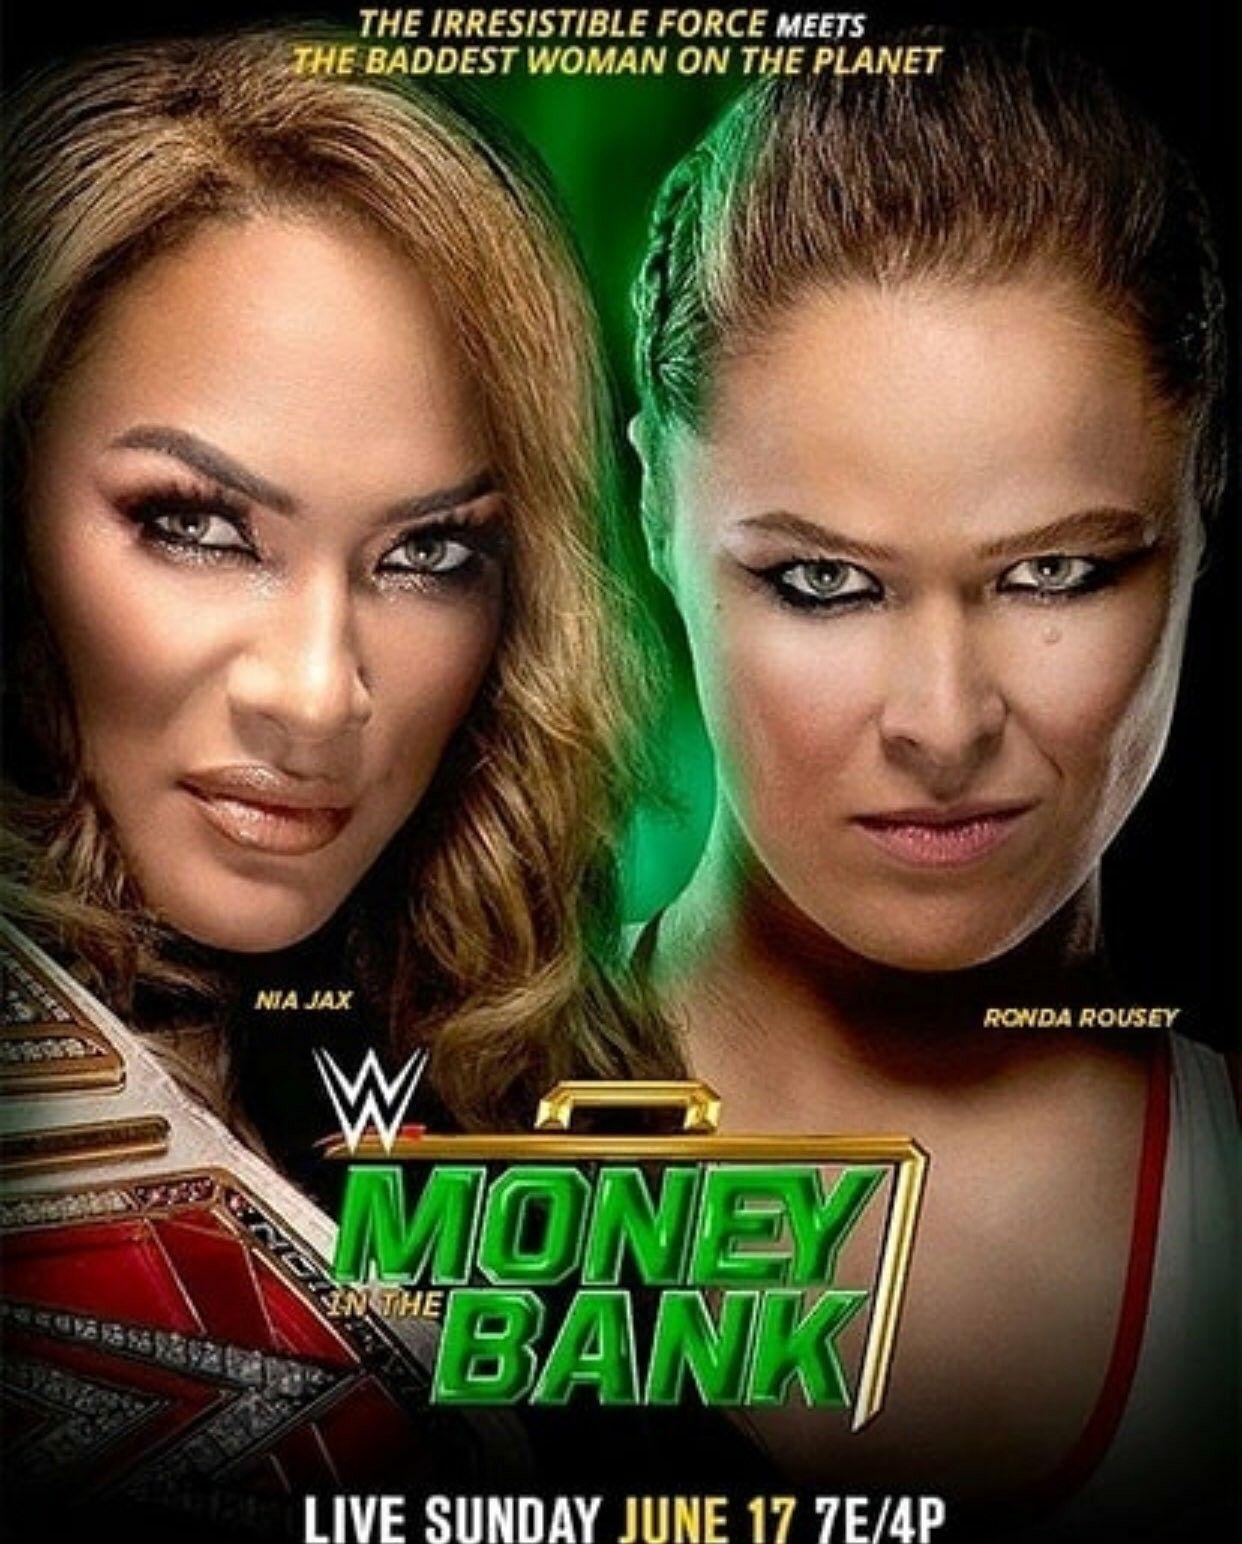 Nia Jax put Raw Woman Champion on the line against Ronda Rousey at